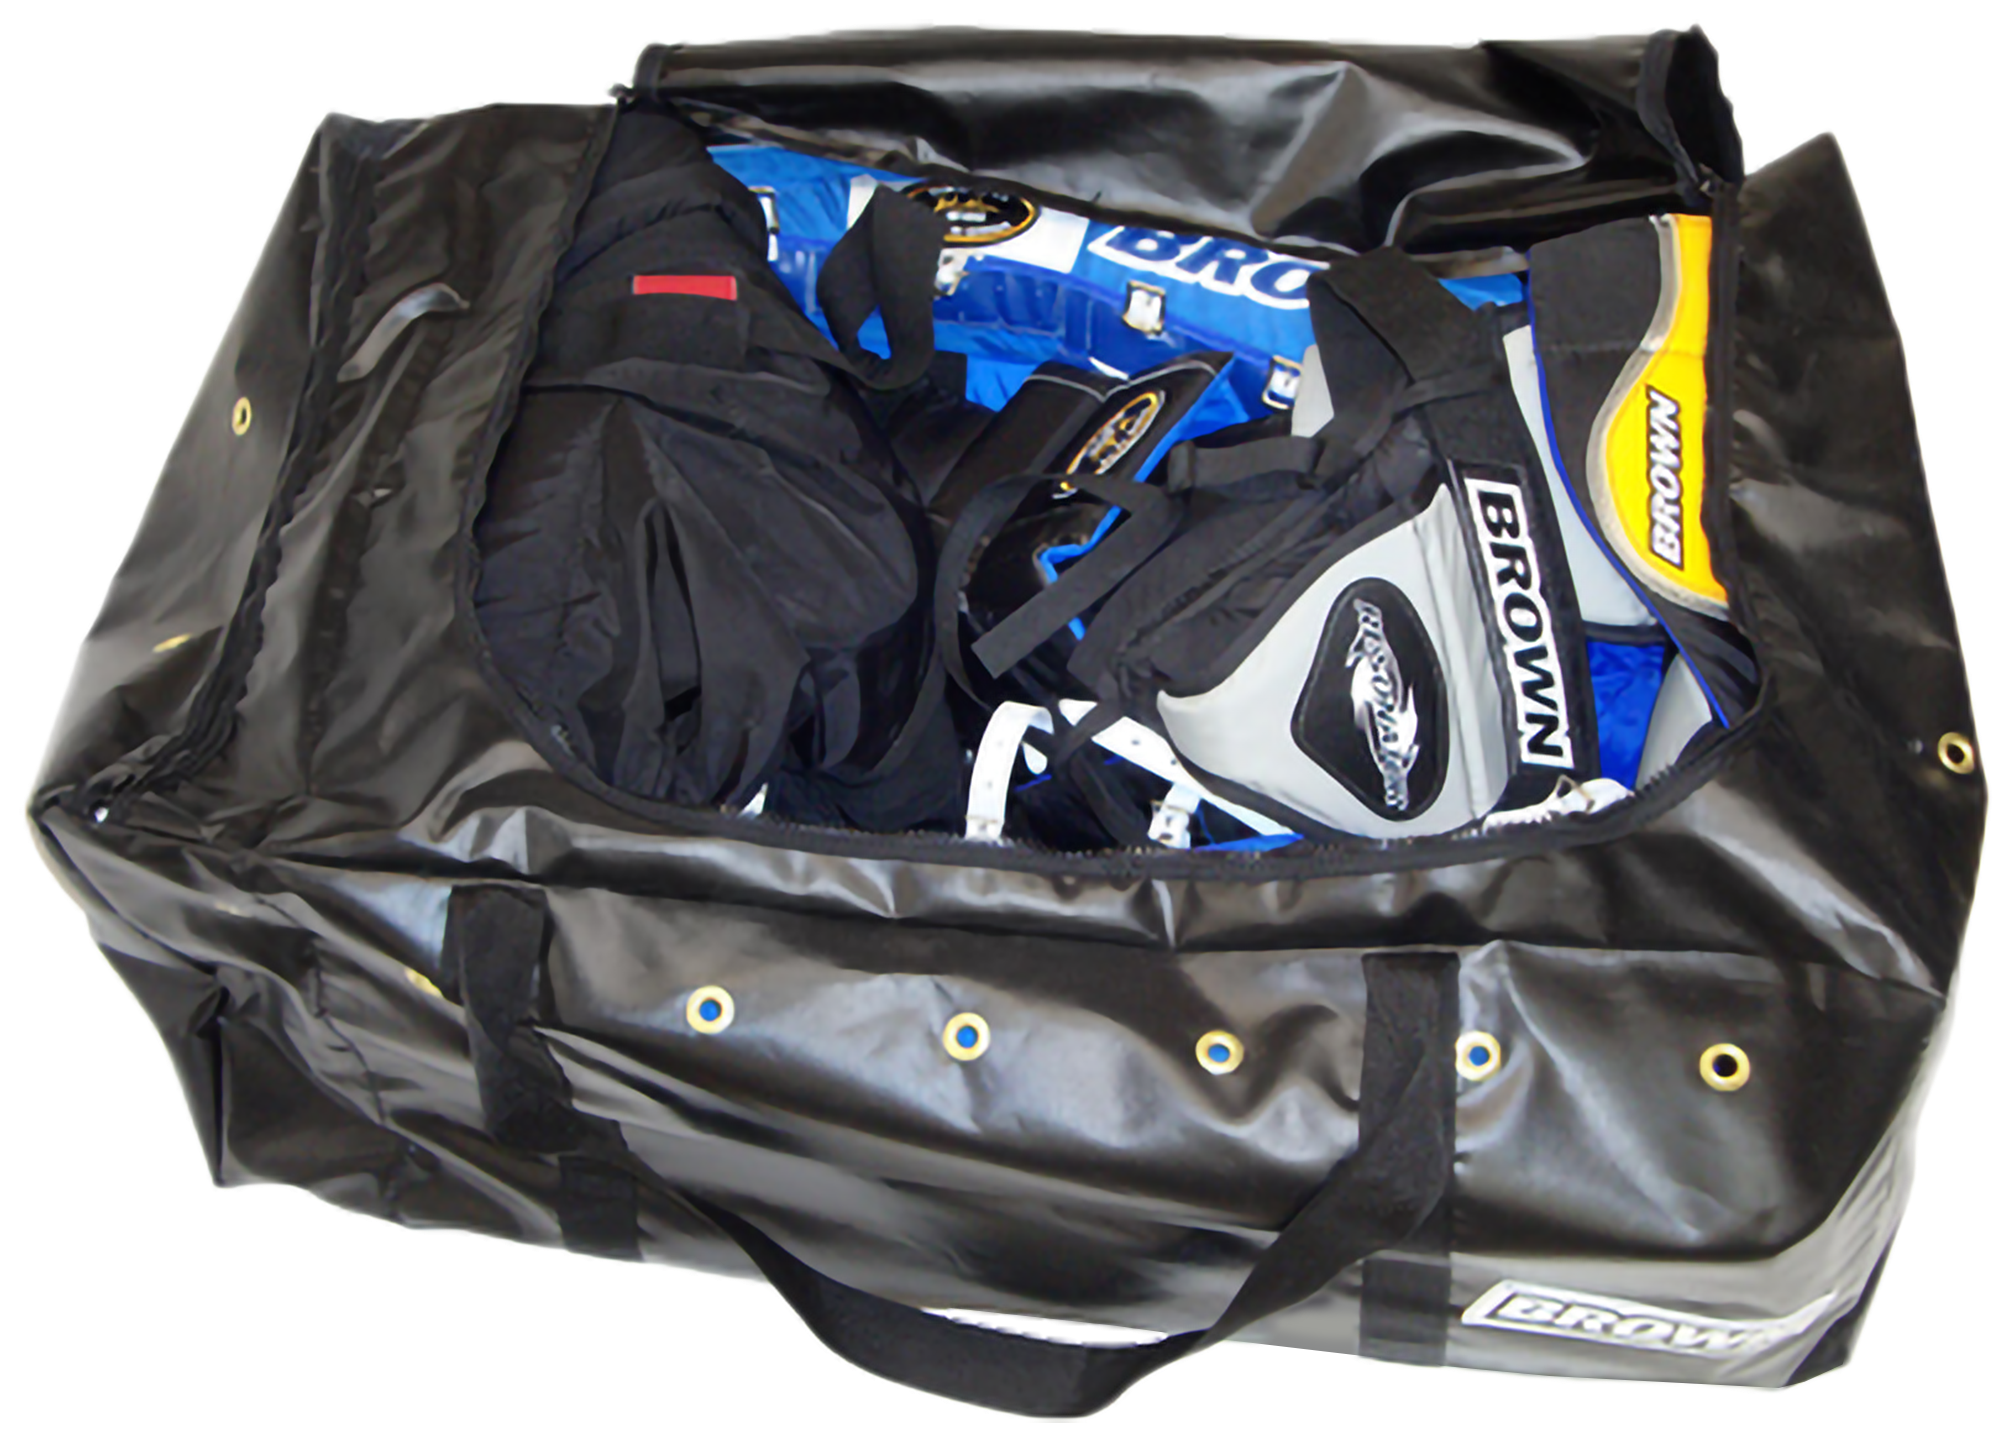 Open 2400 bag with equipment inside